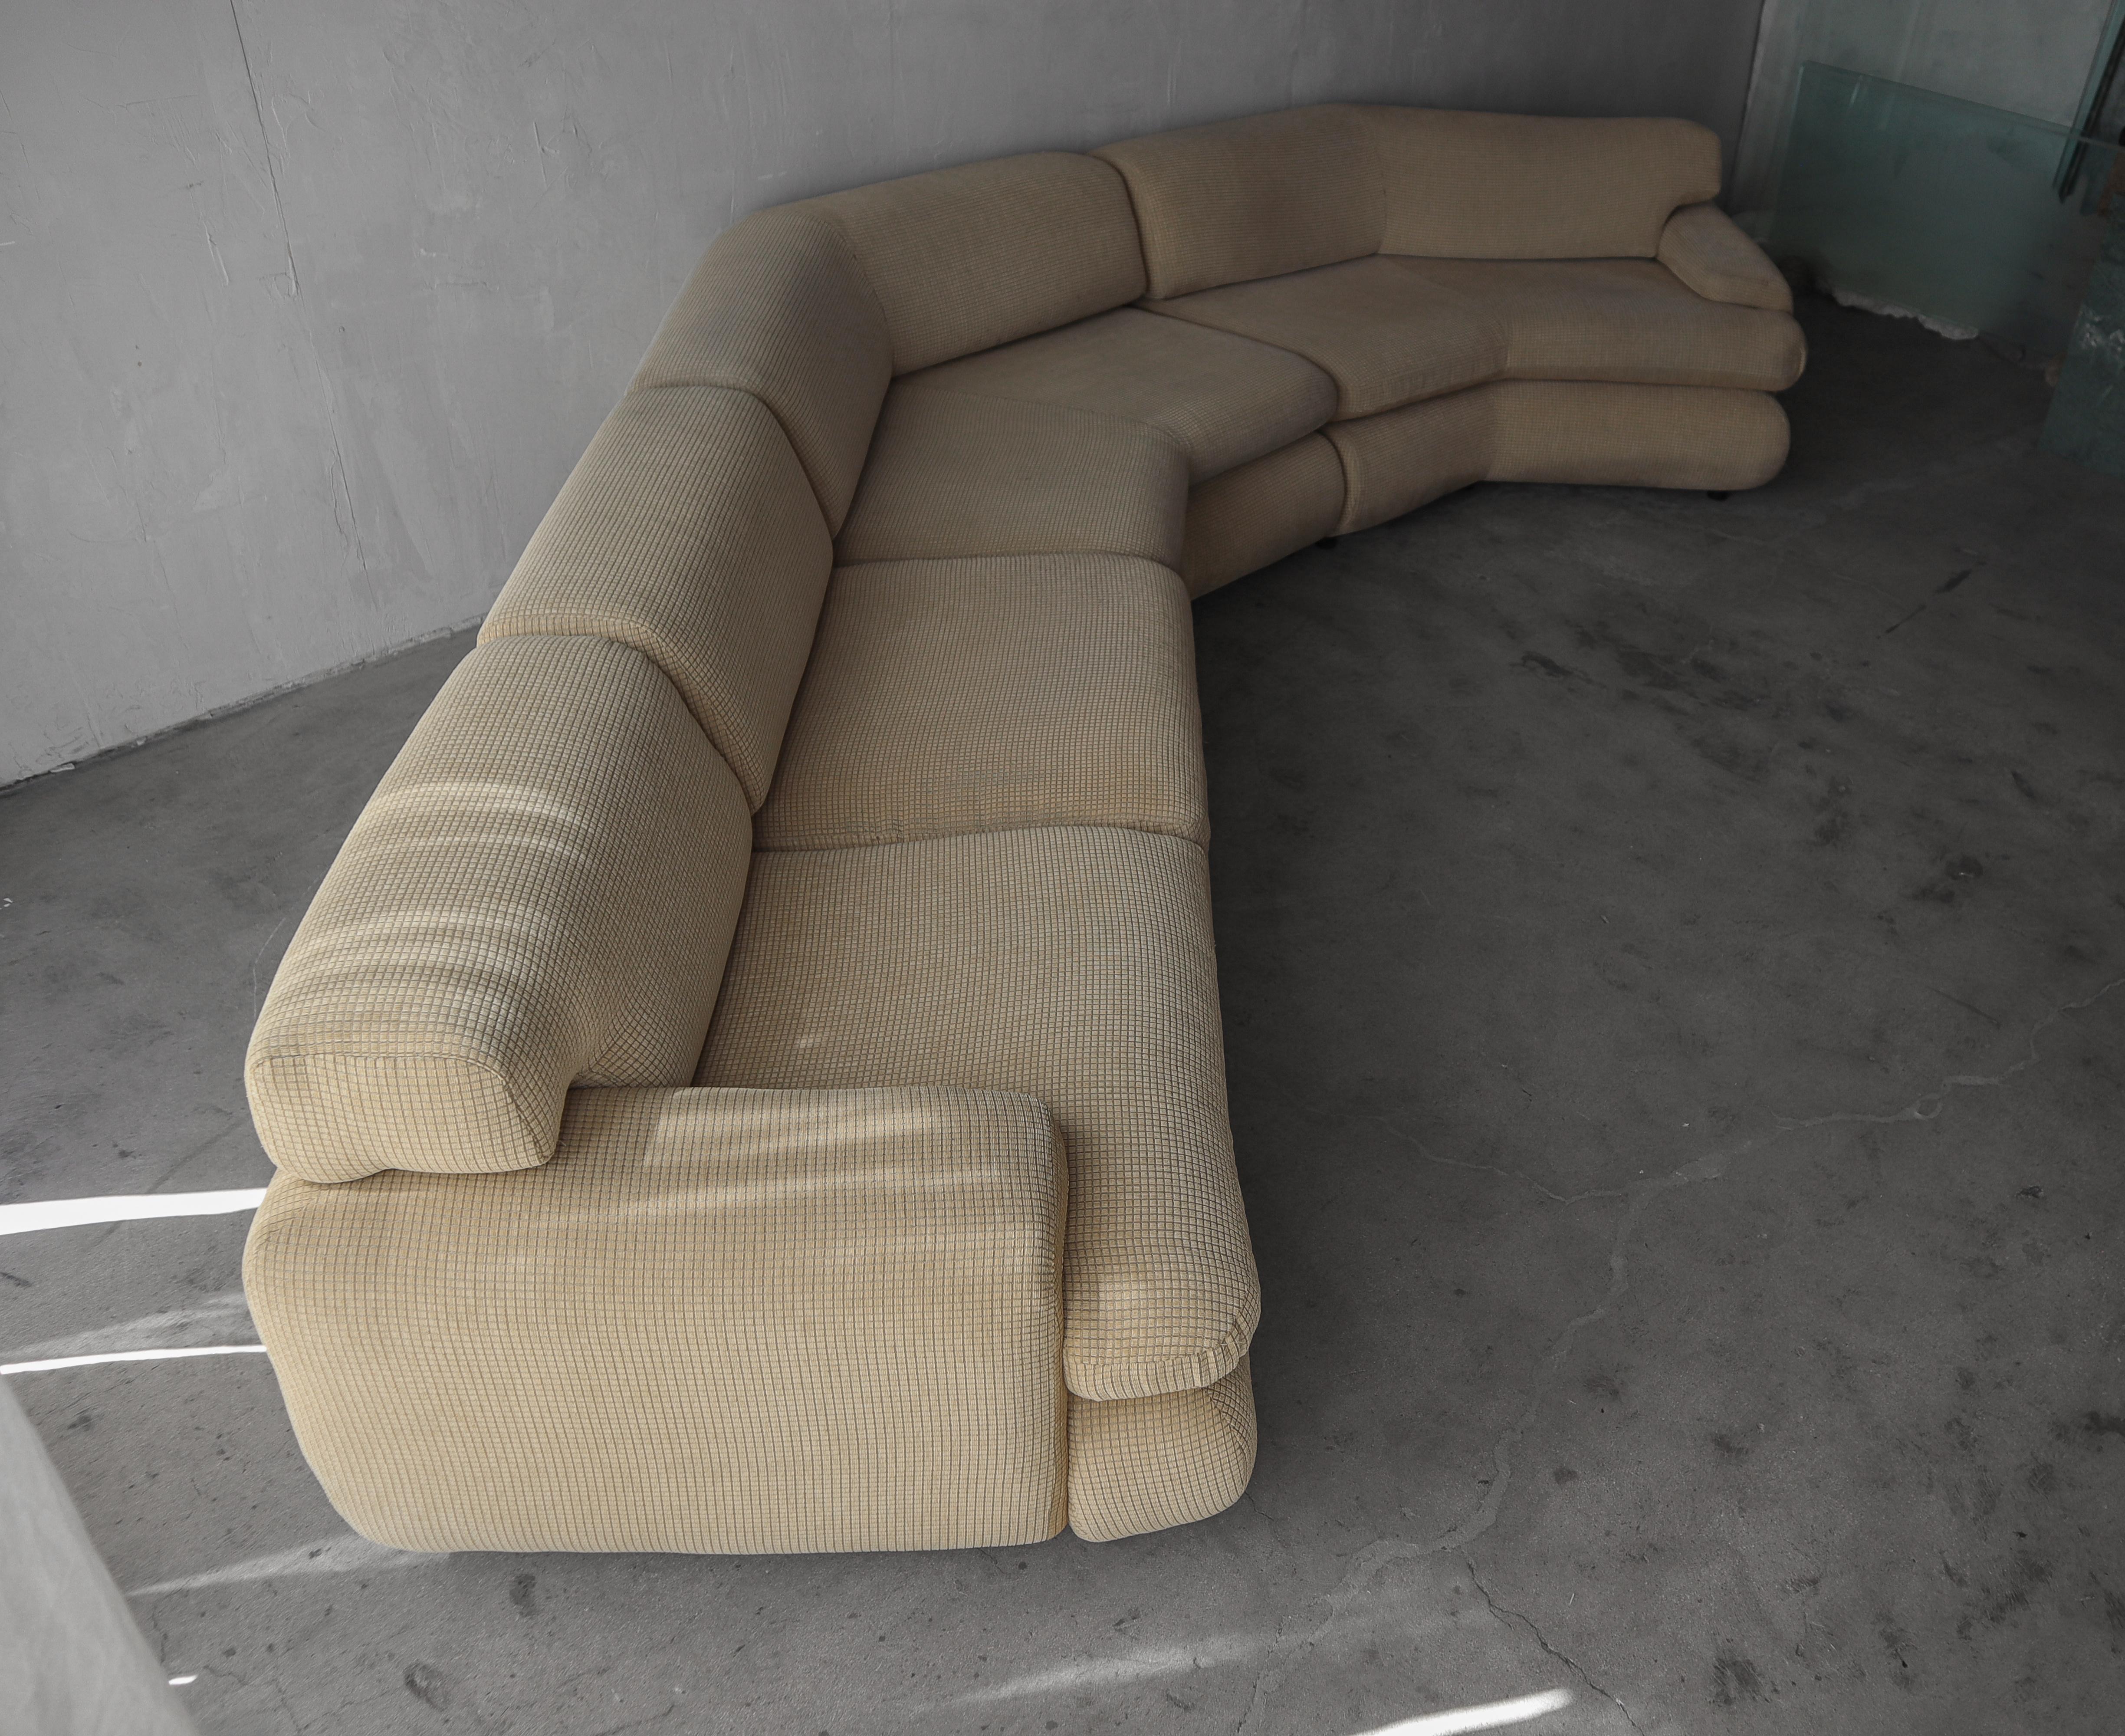 Post Modern 3 Piece Sectional Sofa by Preview In Fair Condition For Sale In Las Vegas, NV